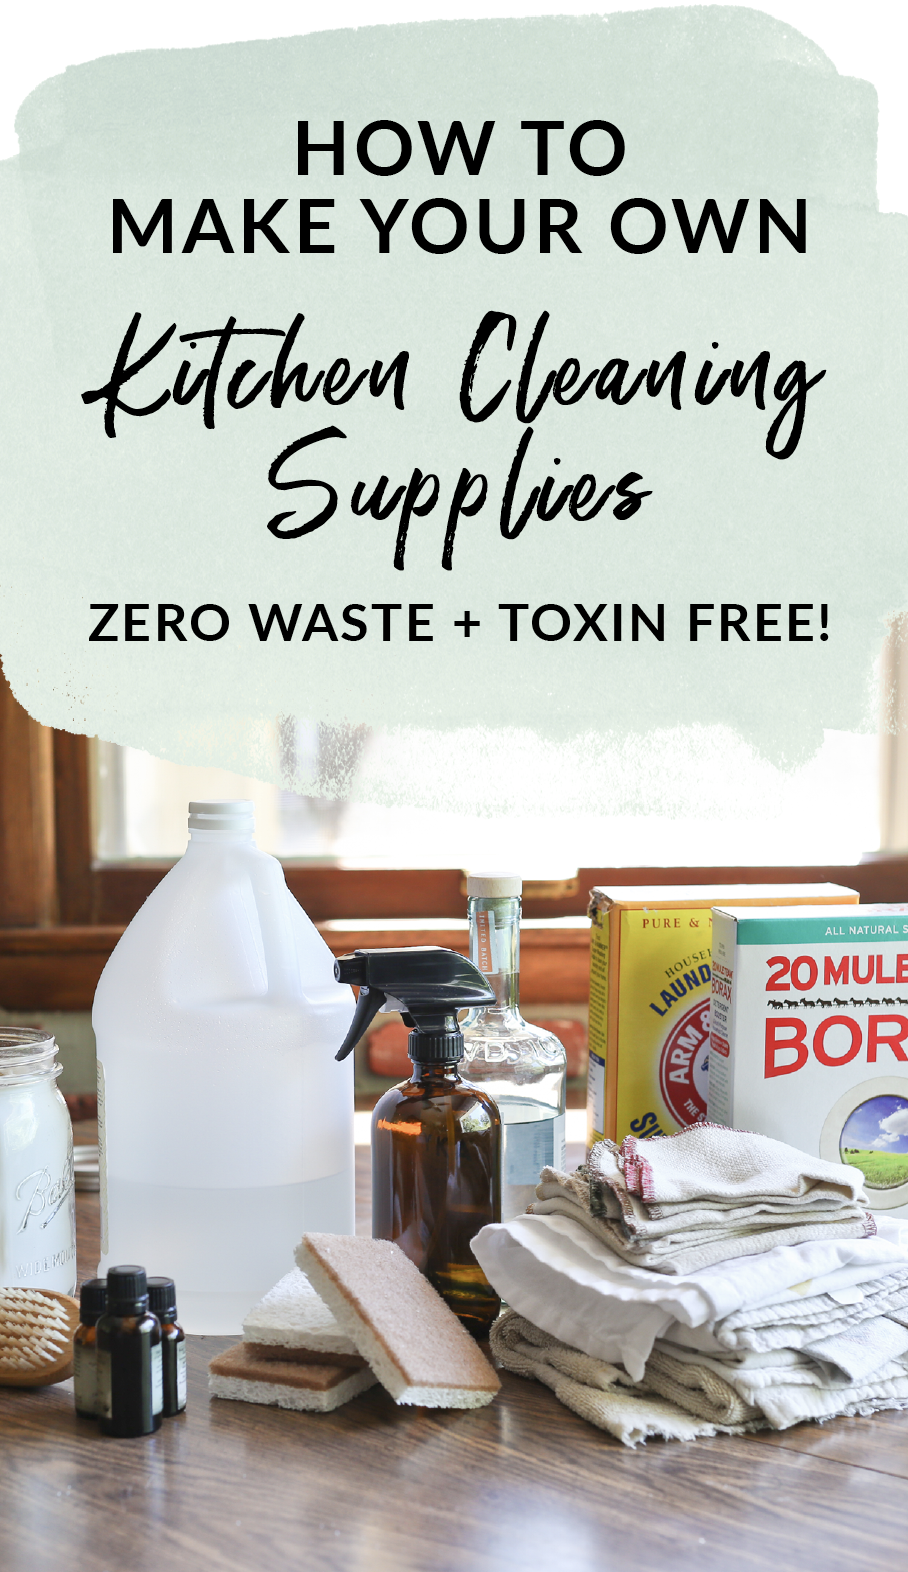 How to make your own kitchen cleaning supplies that are zero waste and toxin free